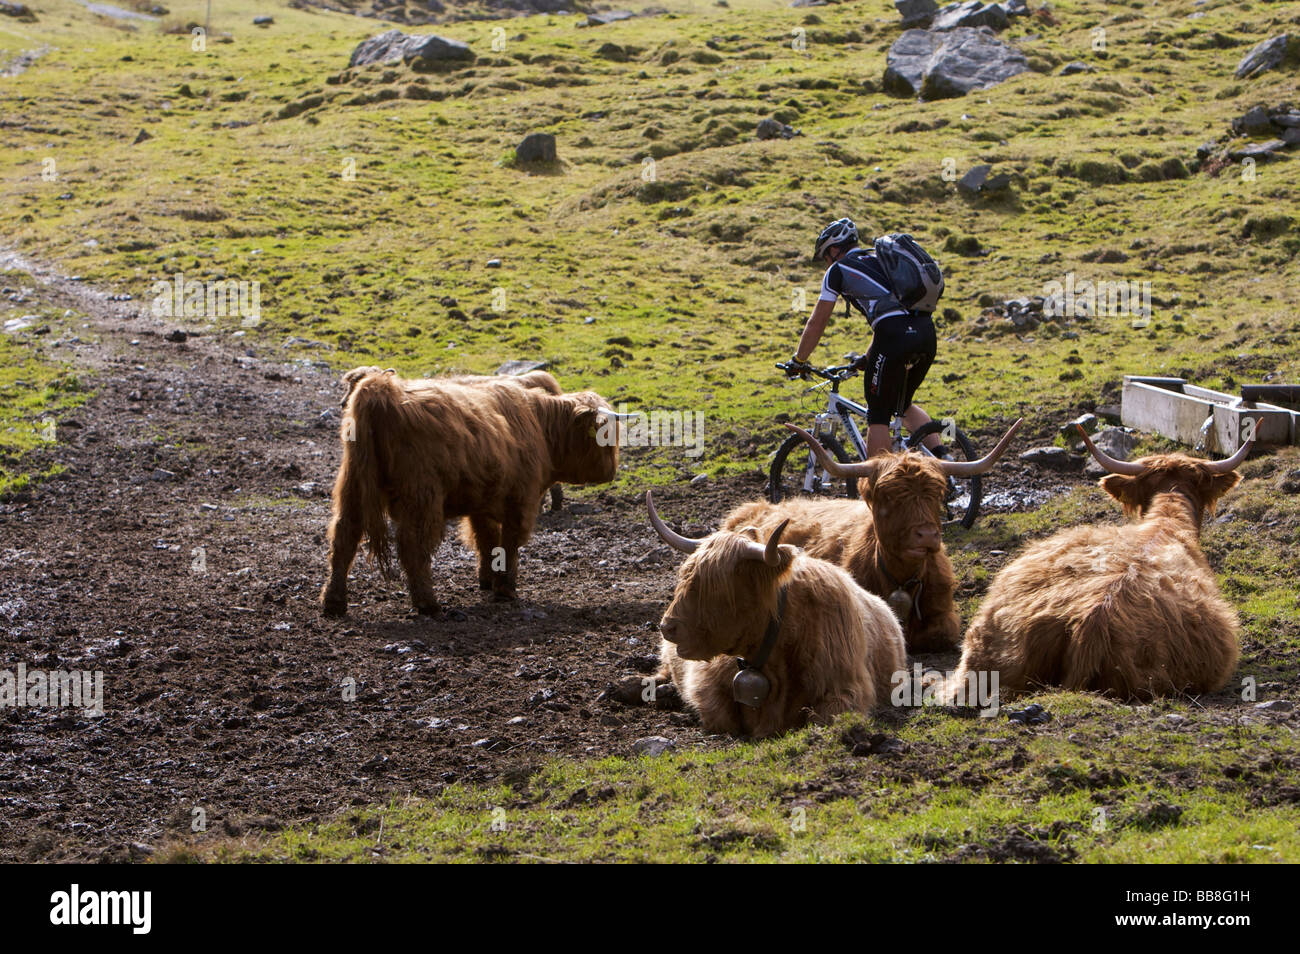 Mountainbiker and highland cattle at the Karalm pasture in the Pinnistal valley, Tyrol, Austria Stock Photo